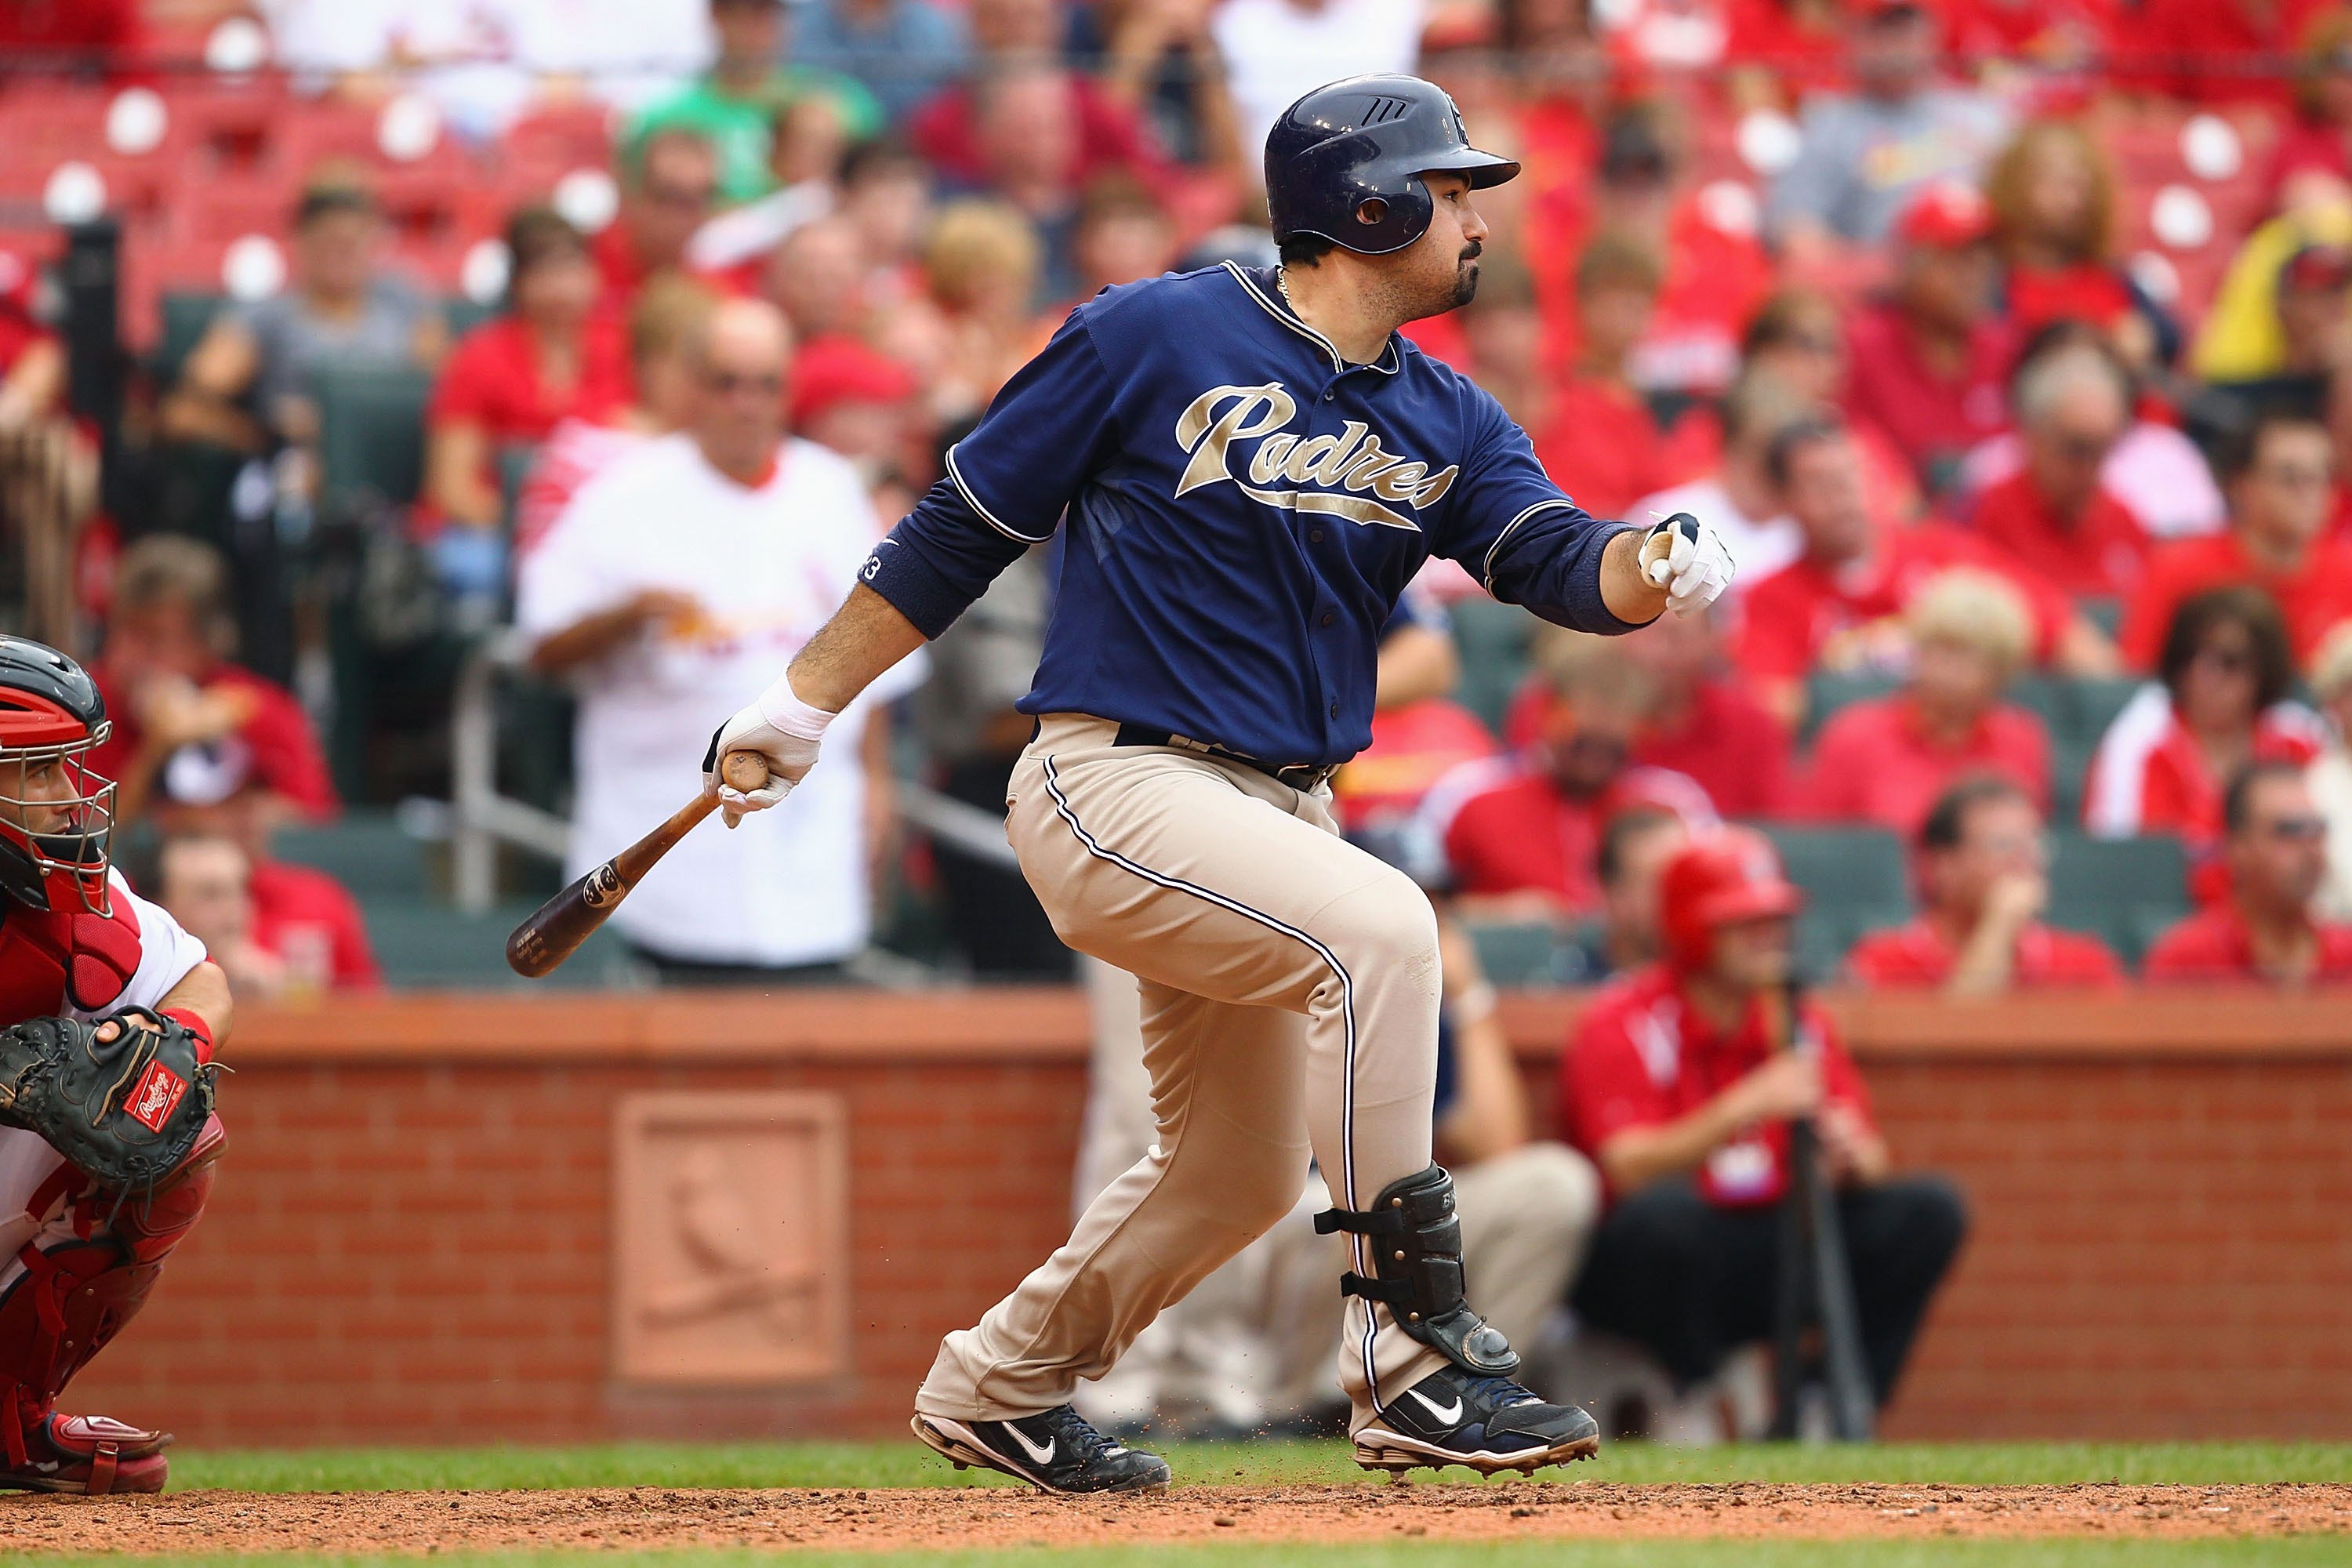 ST. LOUIS - SEPTEMBER 19: Adrian Gonzalez #23 of the San Diego Padres hits an RBI single against the St. Louis Cardinals at Busch Stadium on September 19, 2010 in St. Louis, Missouri.  The Cardinals beat the Padres 4-1.  (Photo by Dilip Vishwanat/Getty Im